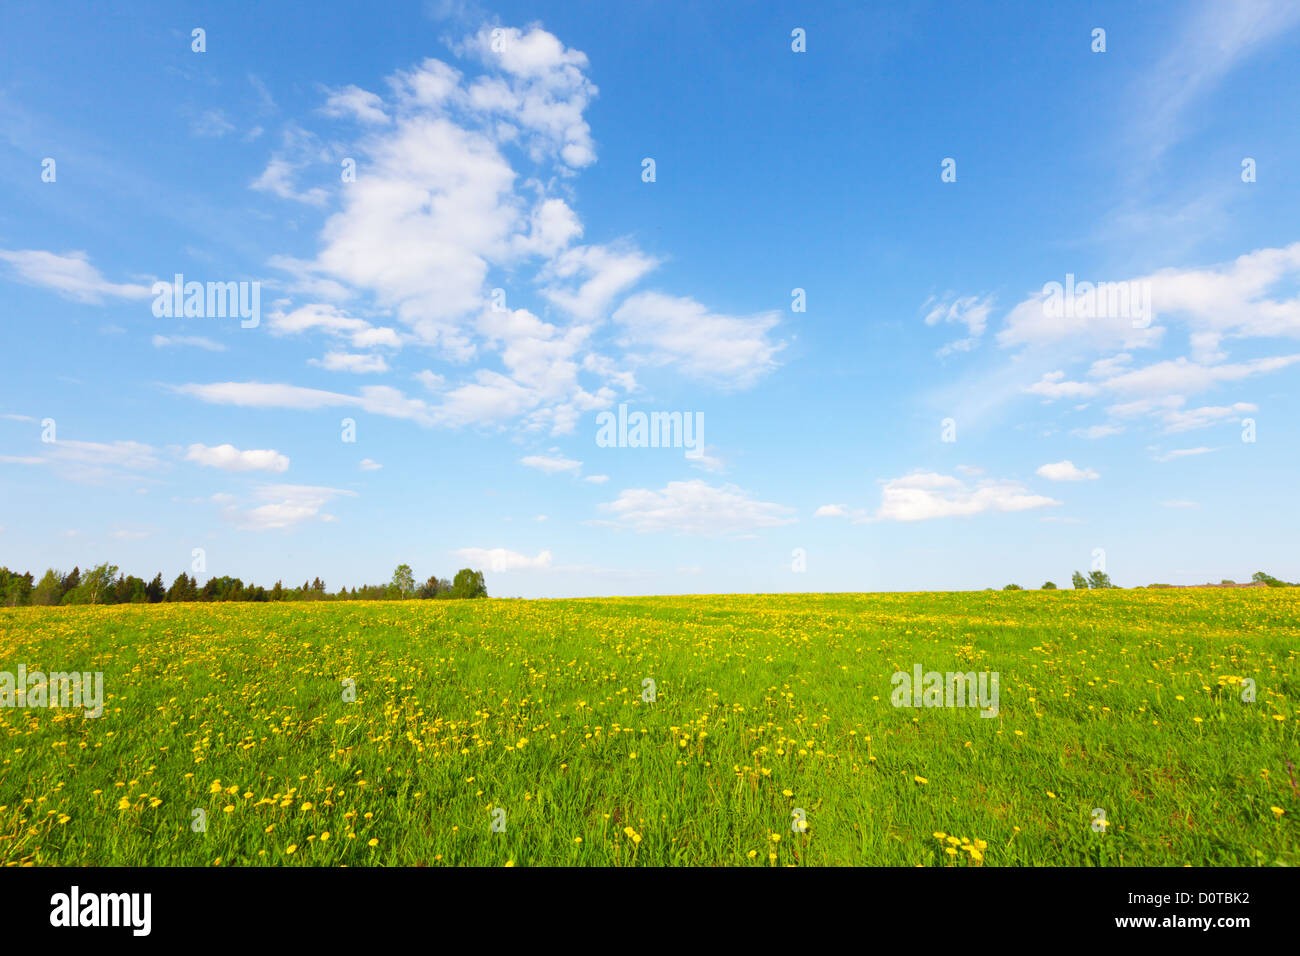 Yellow flowers hill under blue cloudy sky Stock Photo